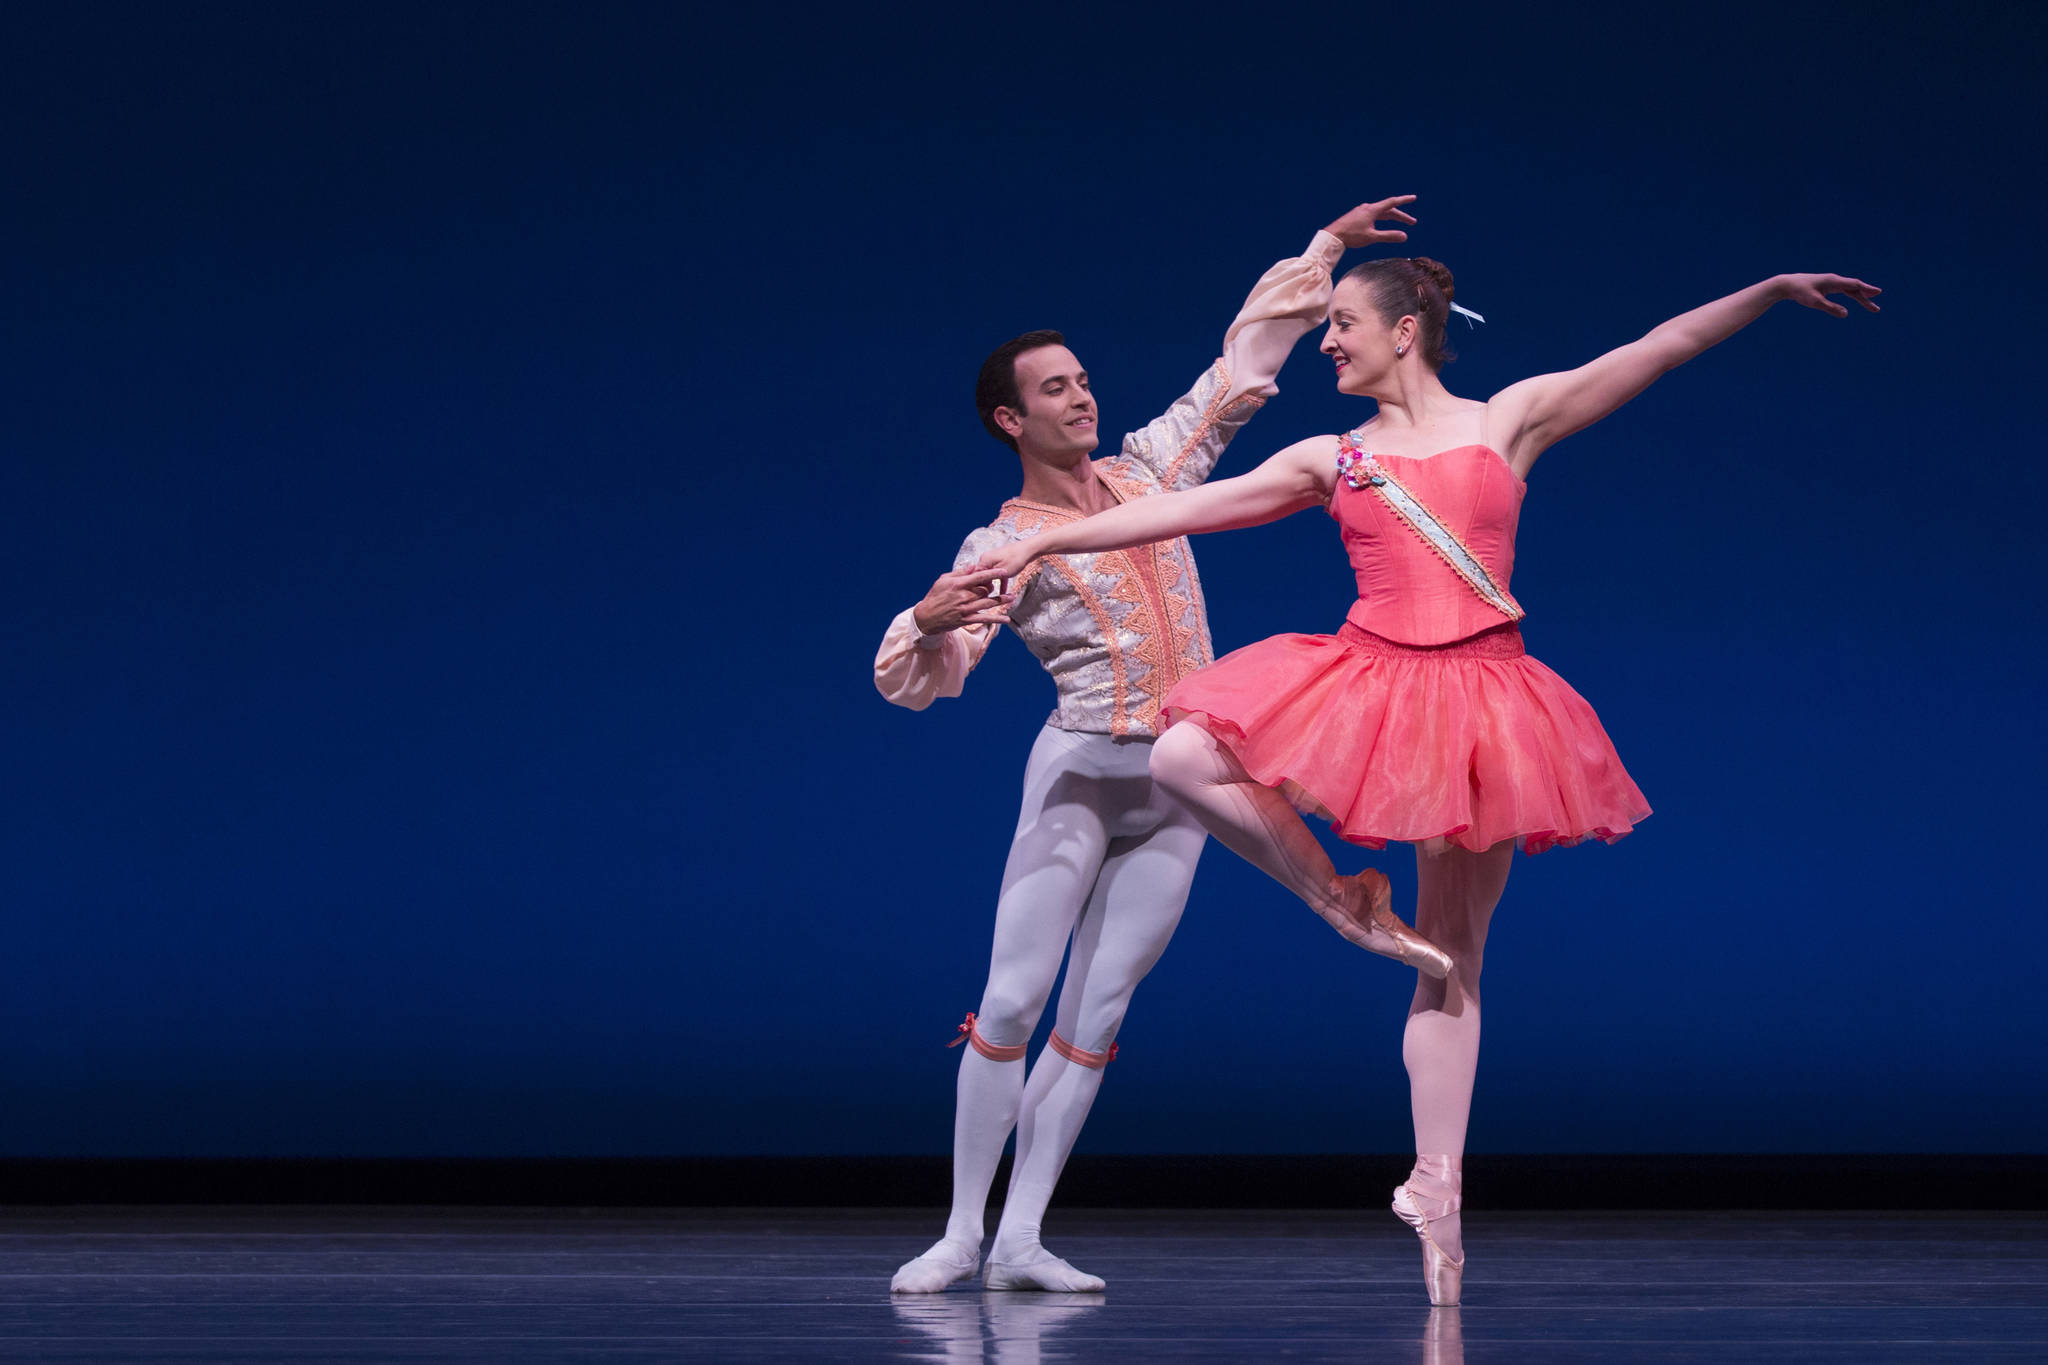 A Bittersweet Ending to Pacific Northwest Ballet’s Season